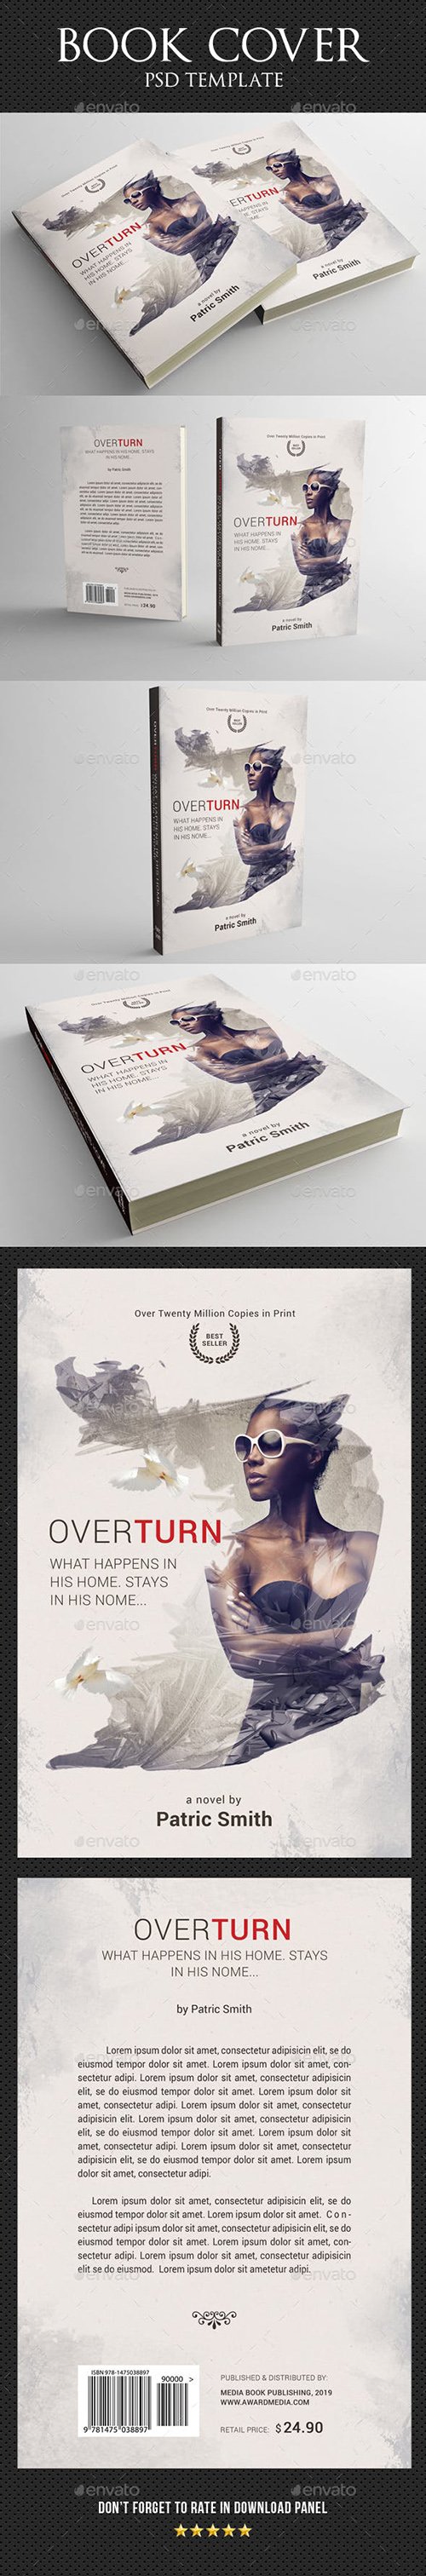 Book Cover Template 61